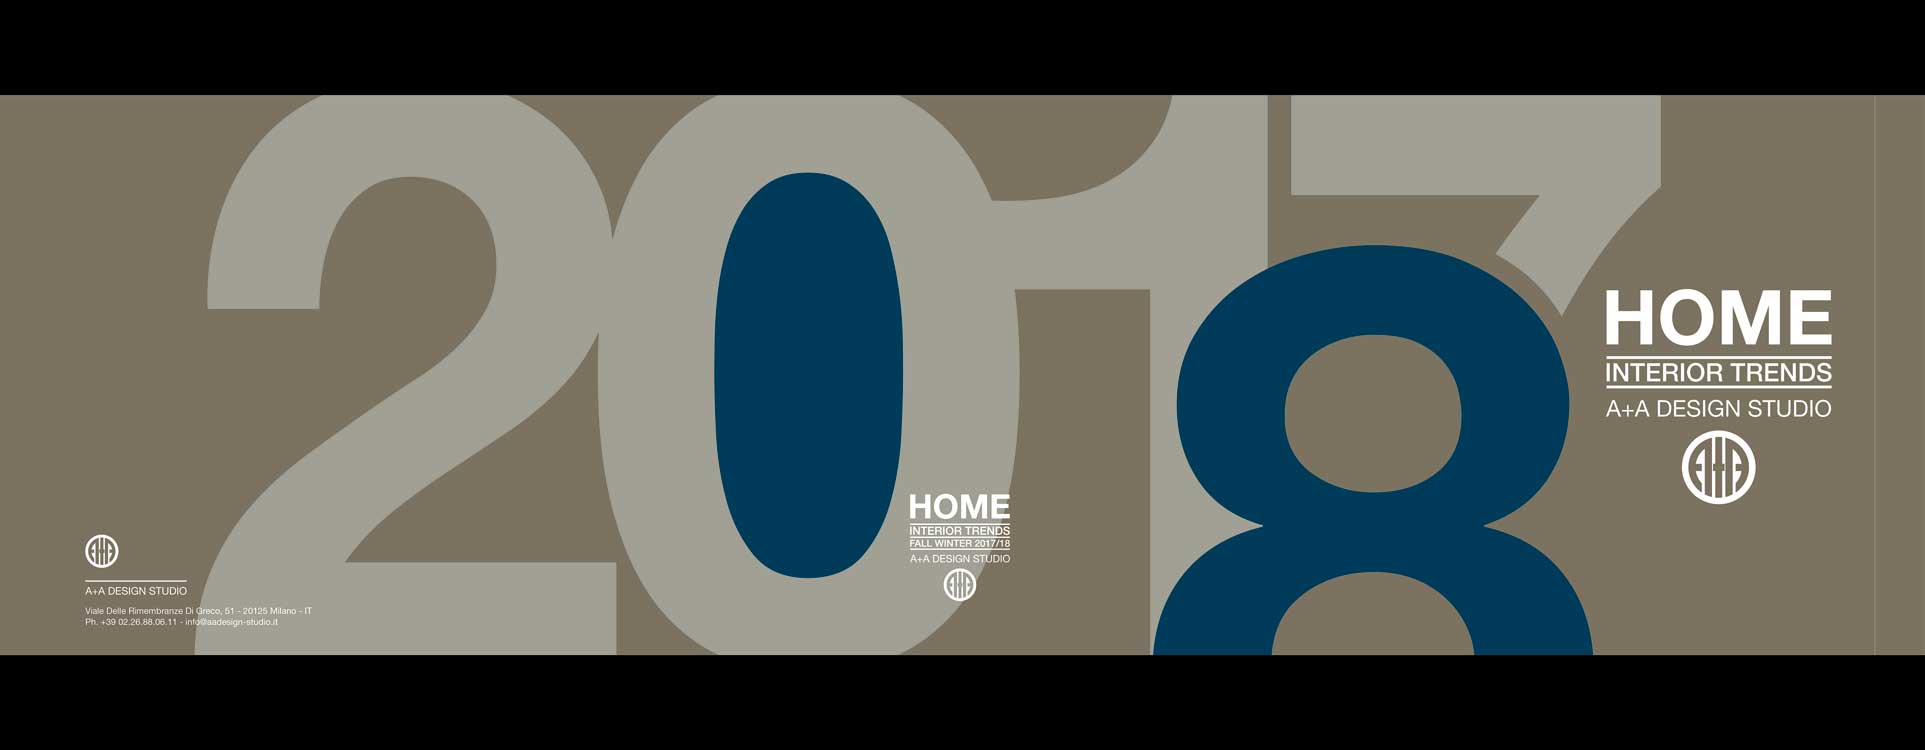 Home Interior Trends A/W 2017/2018  modeinformation GmbH